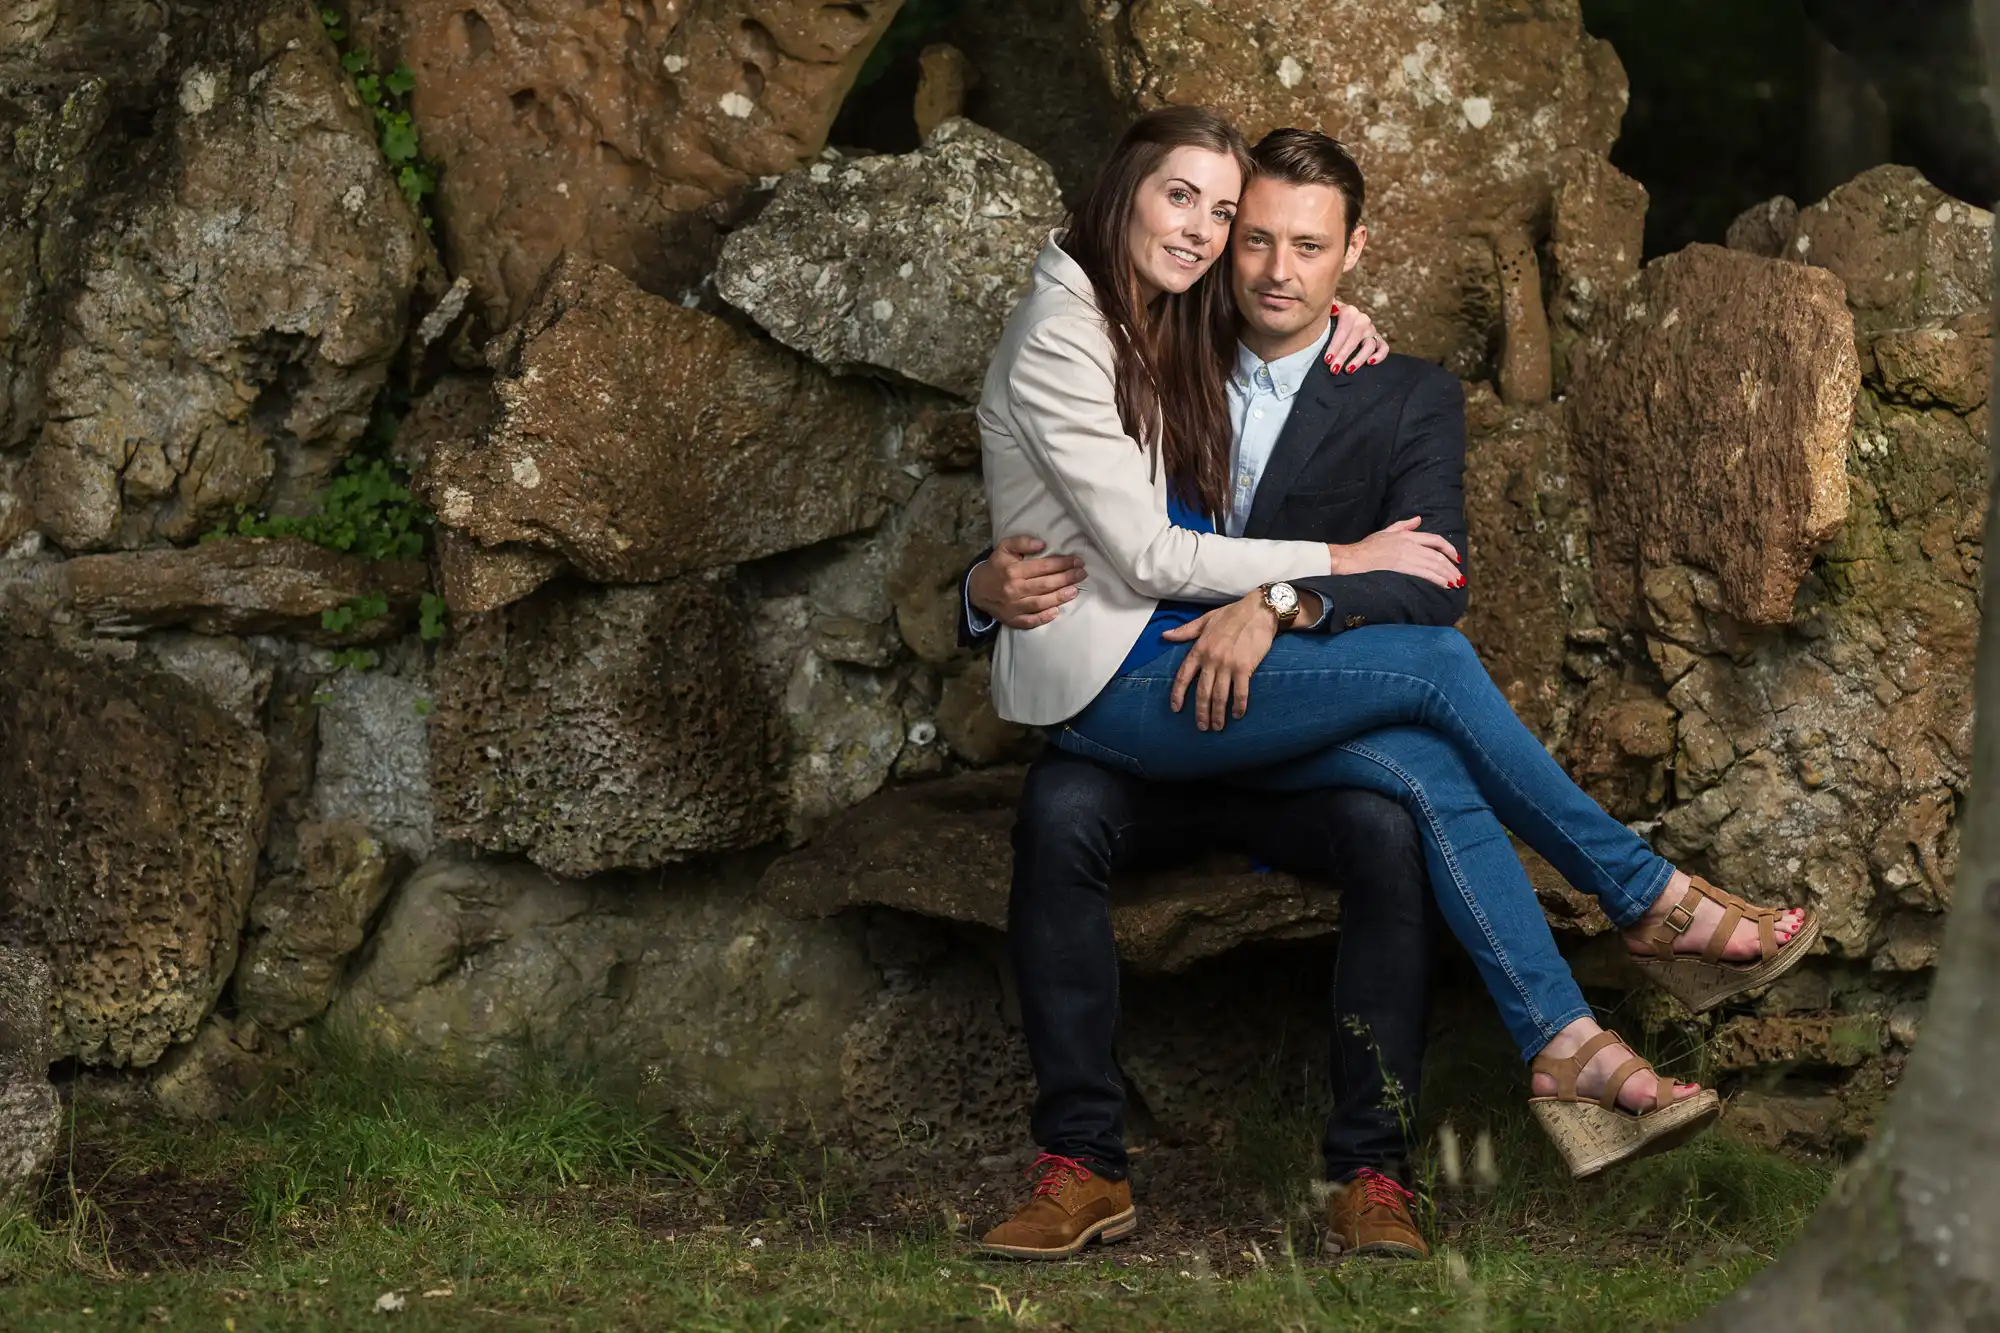 A couple sitting closely together, the man seated on a rock and the woman embracing him from behind, both smiling, set against a rugged stone backdrop.